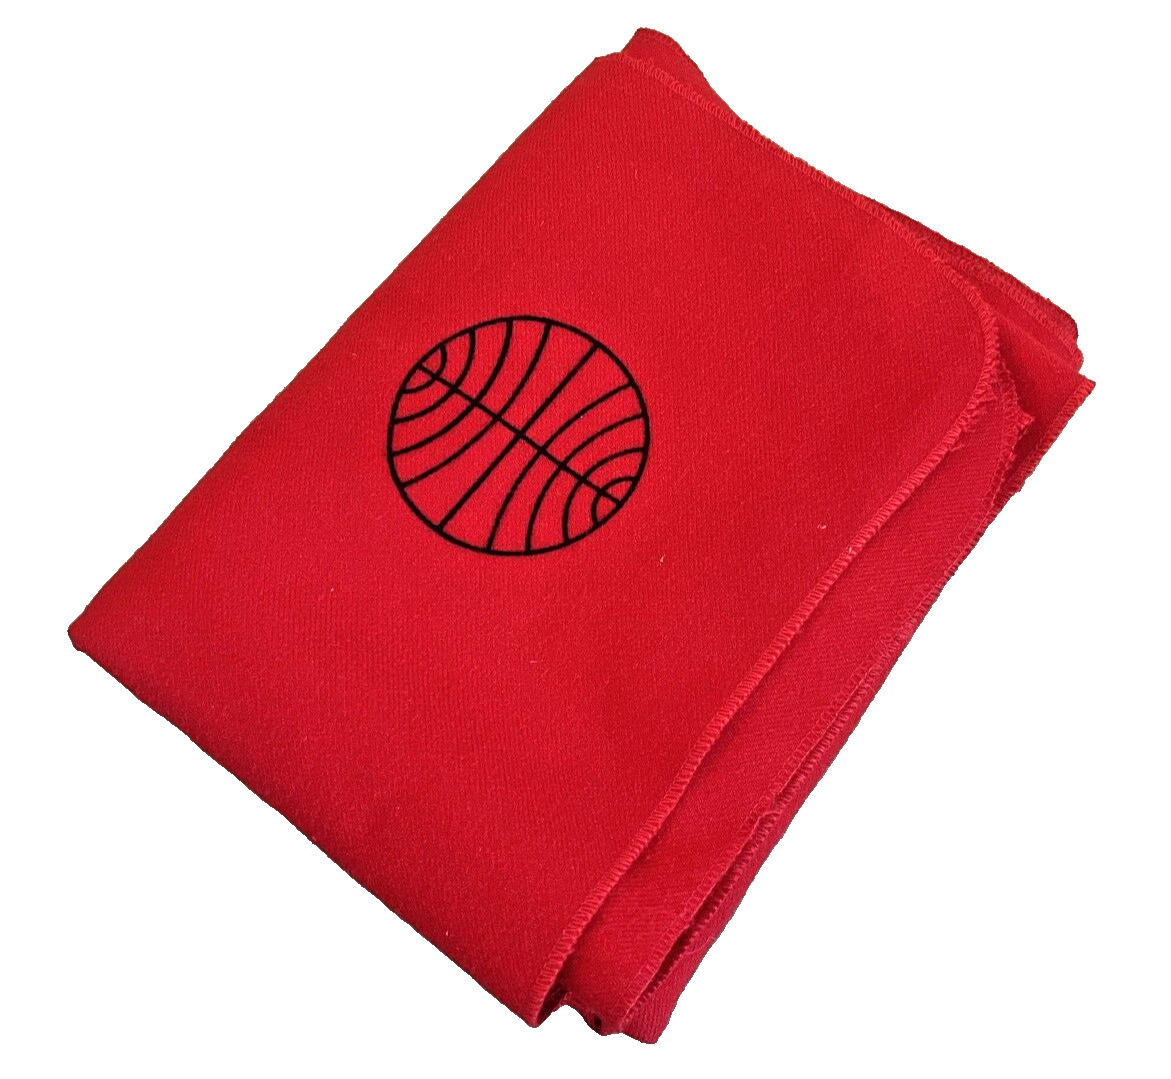 PanAm World Airways Red Wool Blanket Airline Collectible, 50